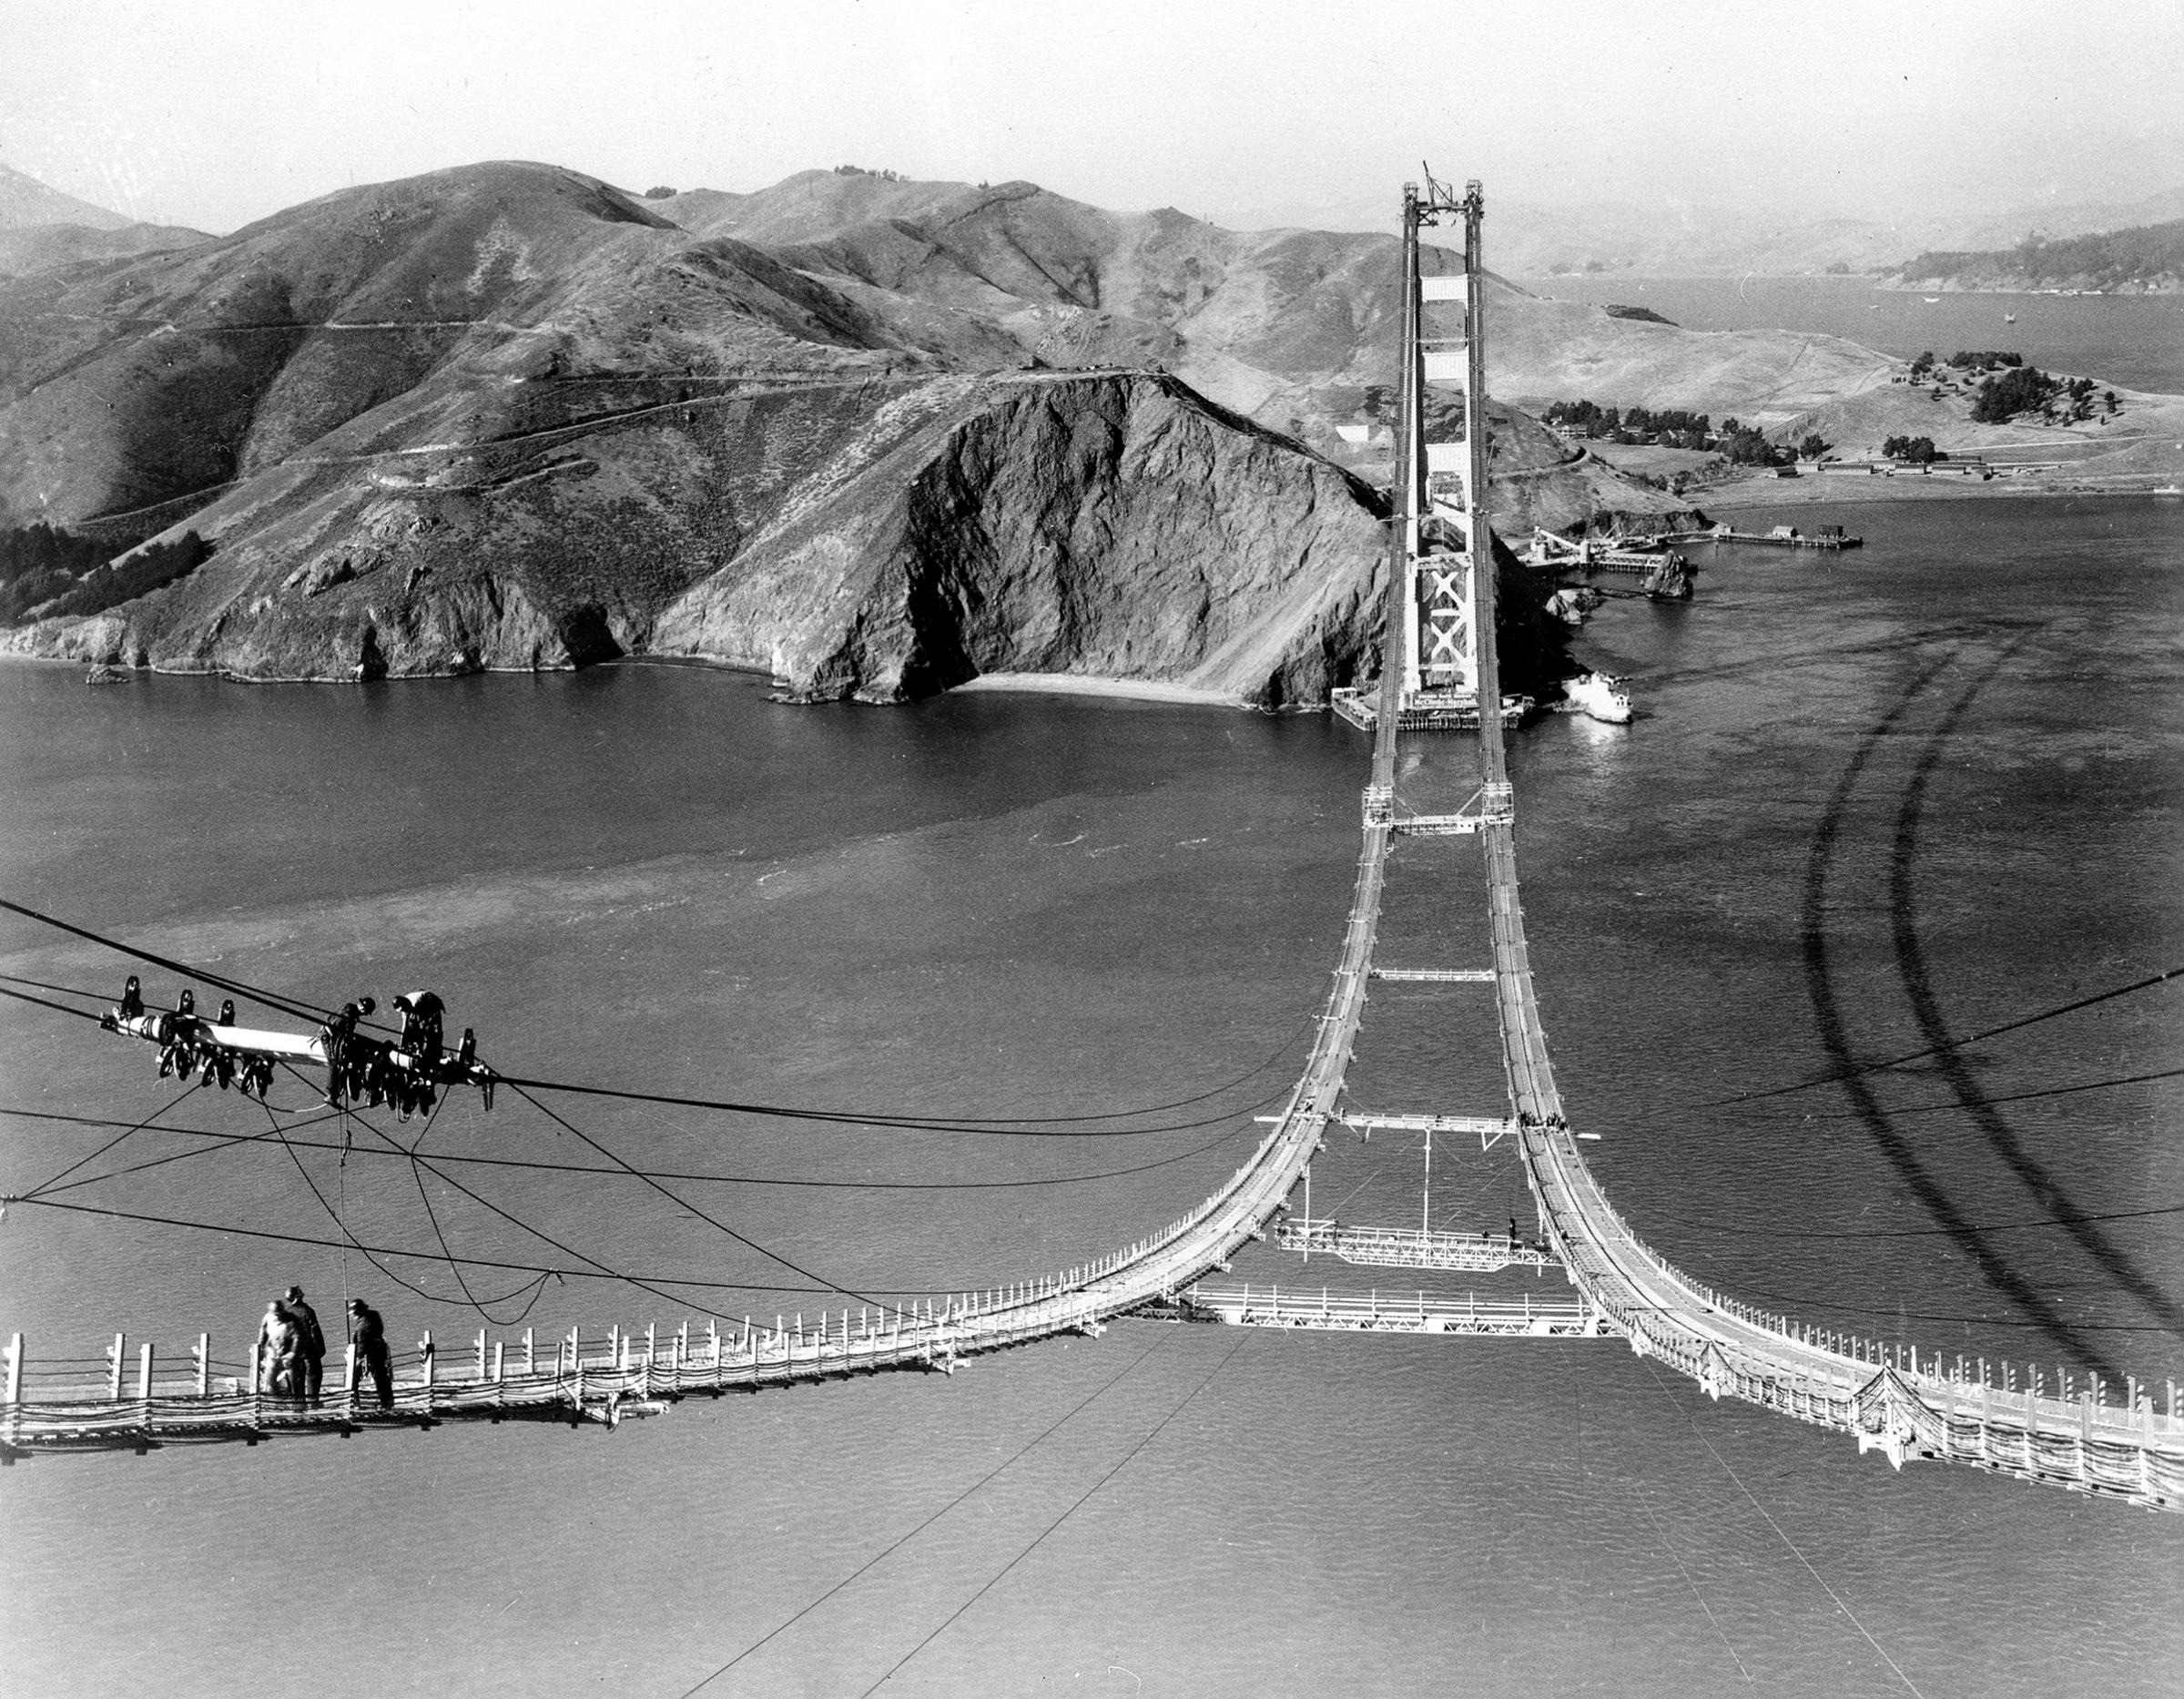 Construction of the Golden Gate bridge in the 1930s.